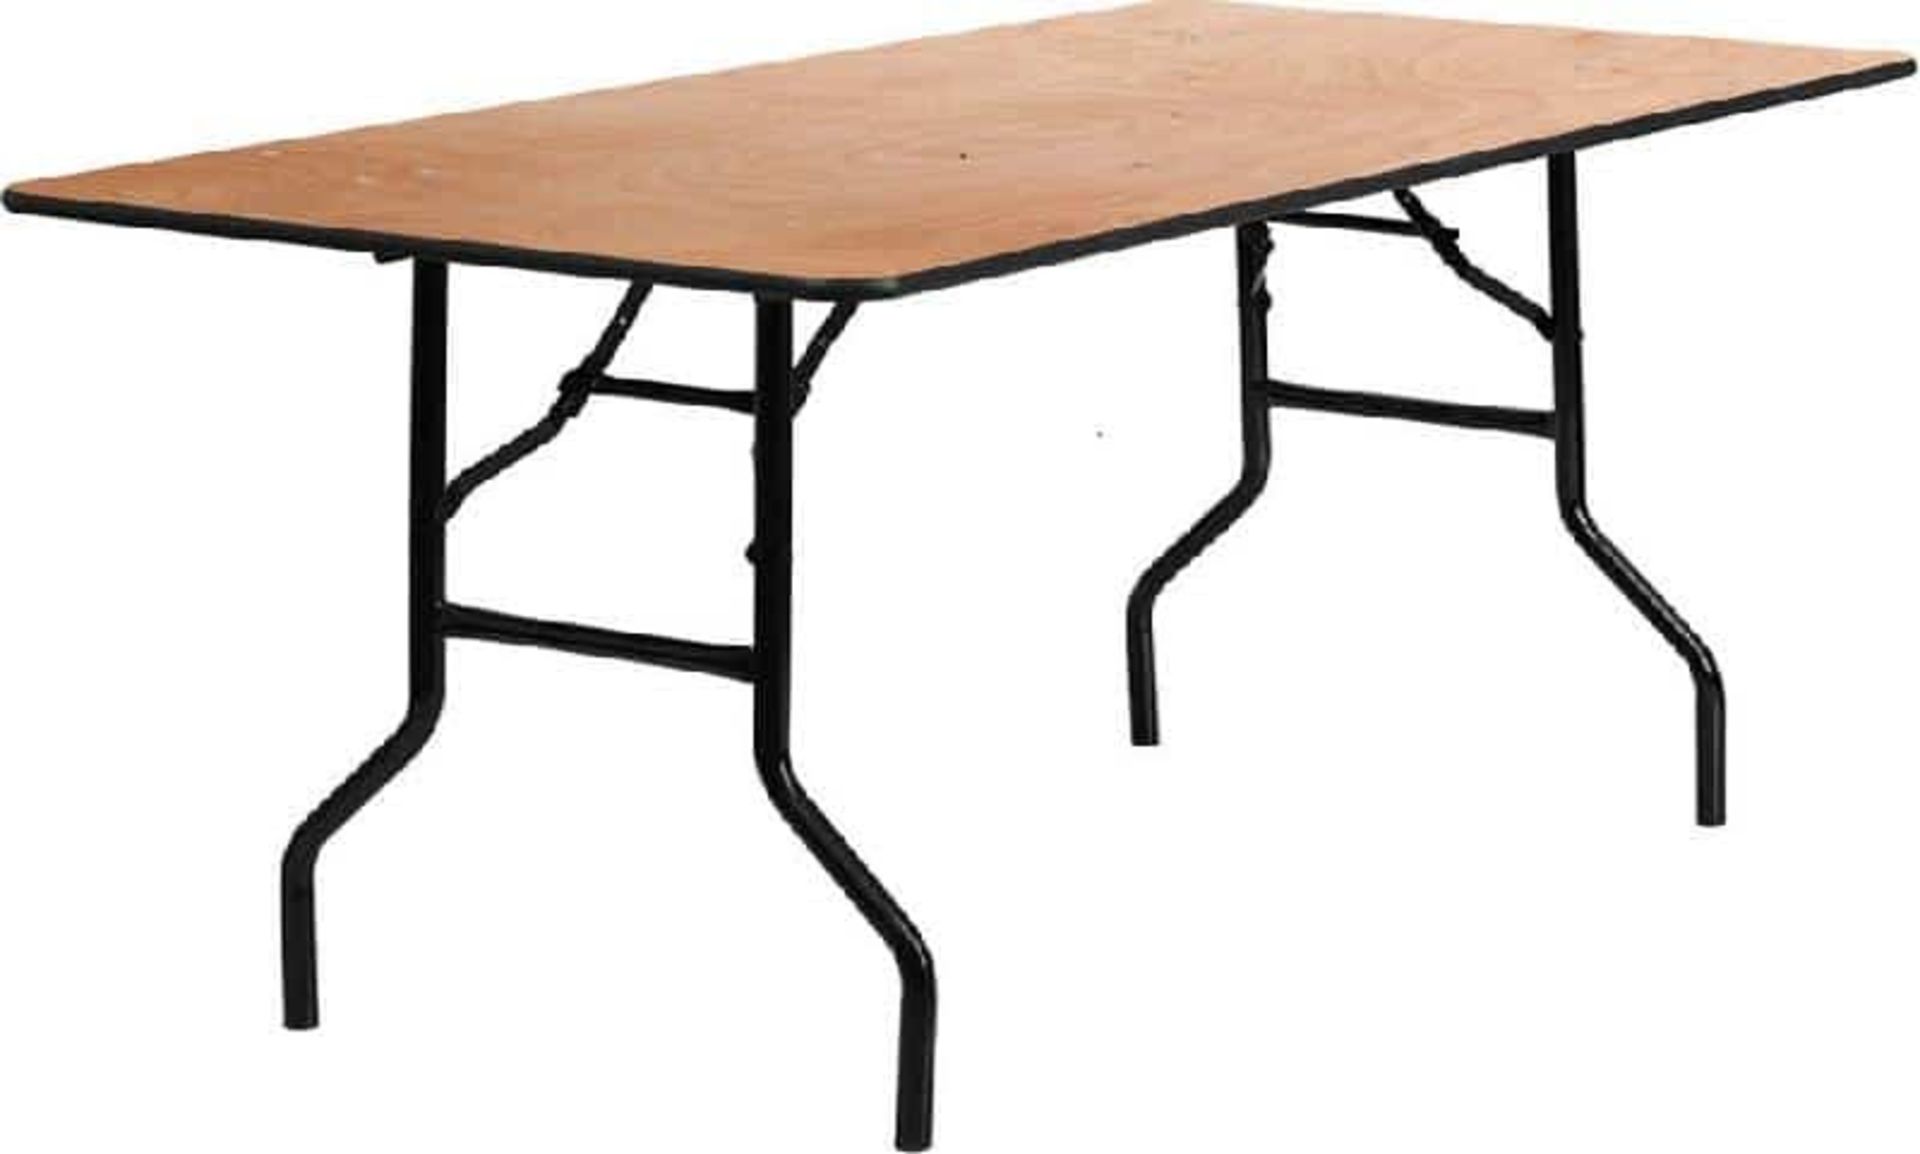 4 x 6ft x 2ft 6in contract quality trestle tables